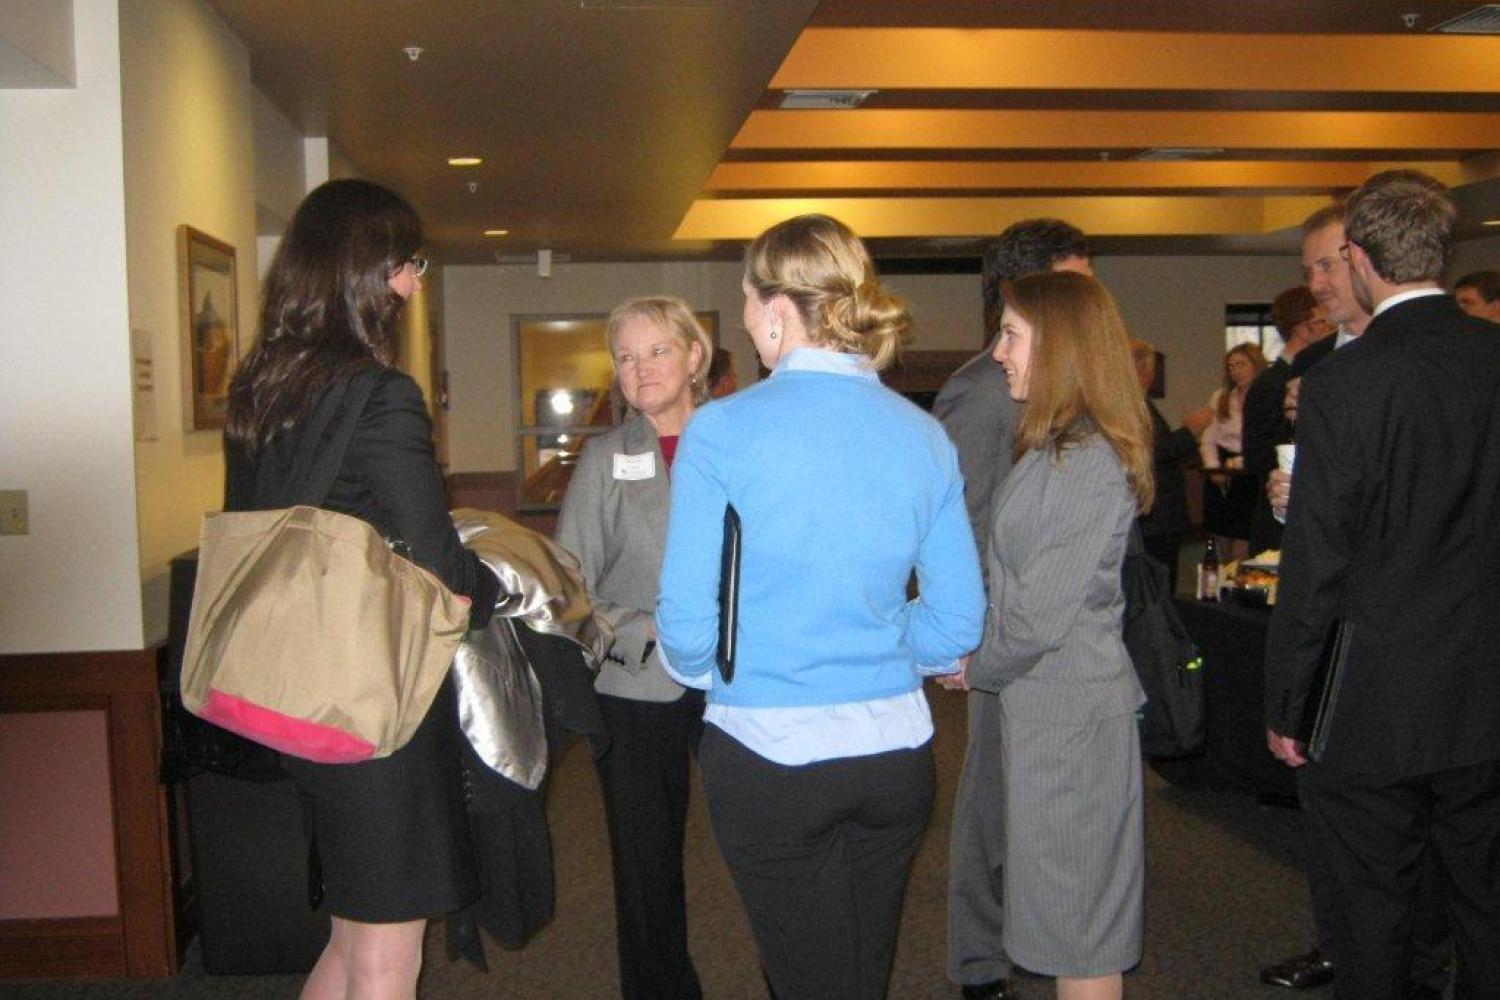 Students create professional connections with employers during the Reception Honoring Employers, sponsored by Husch Blackwell LLP.